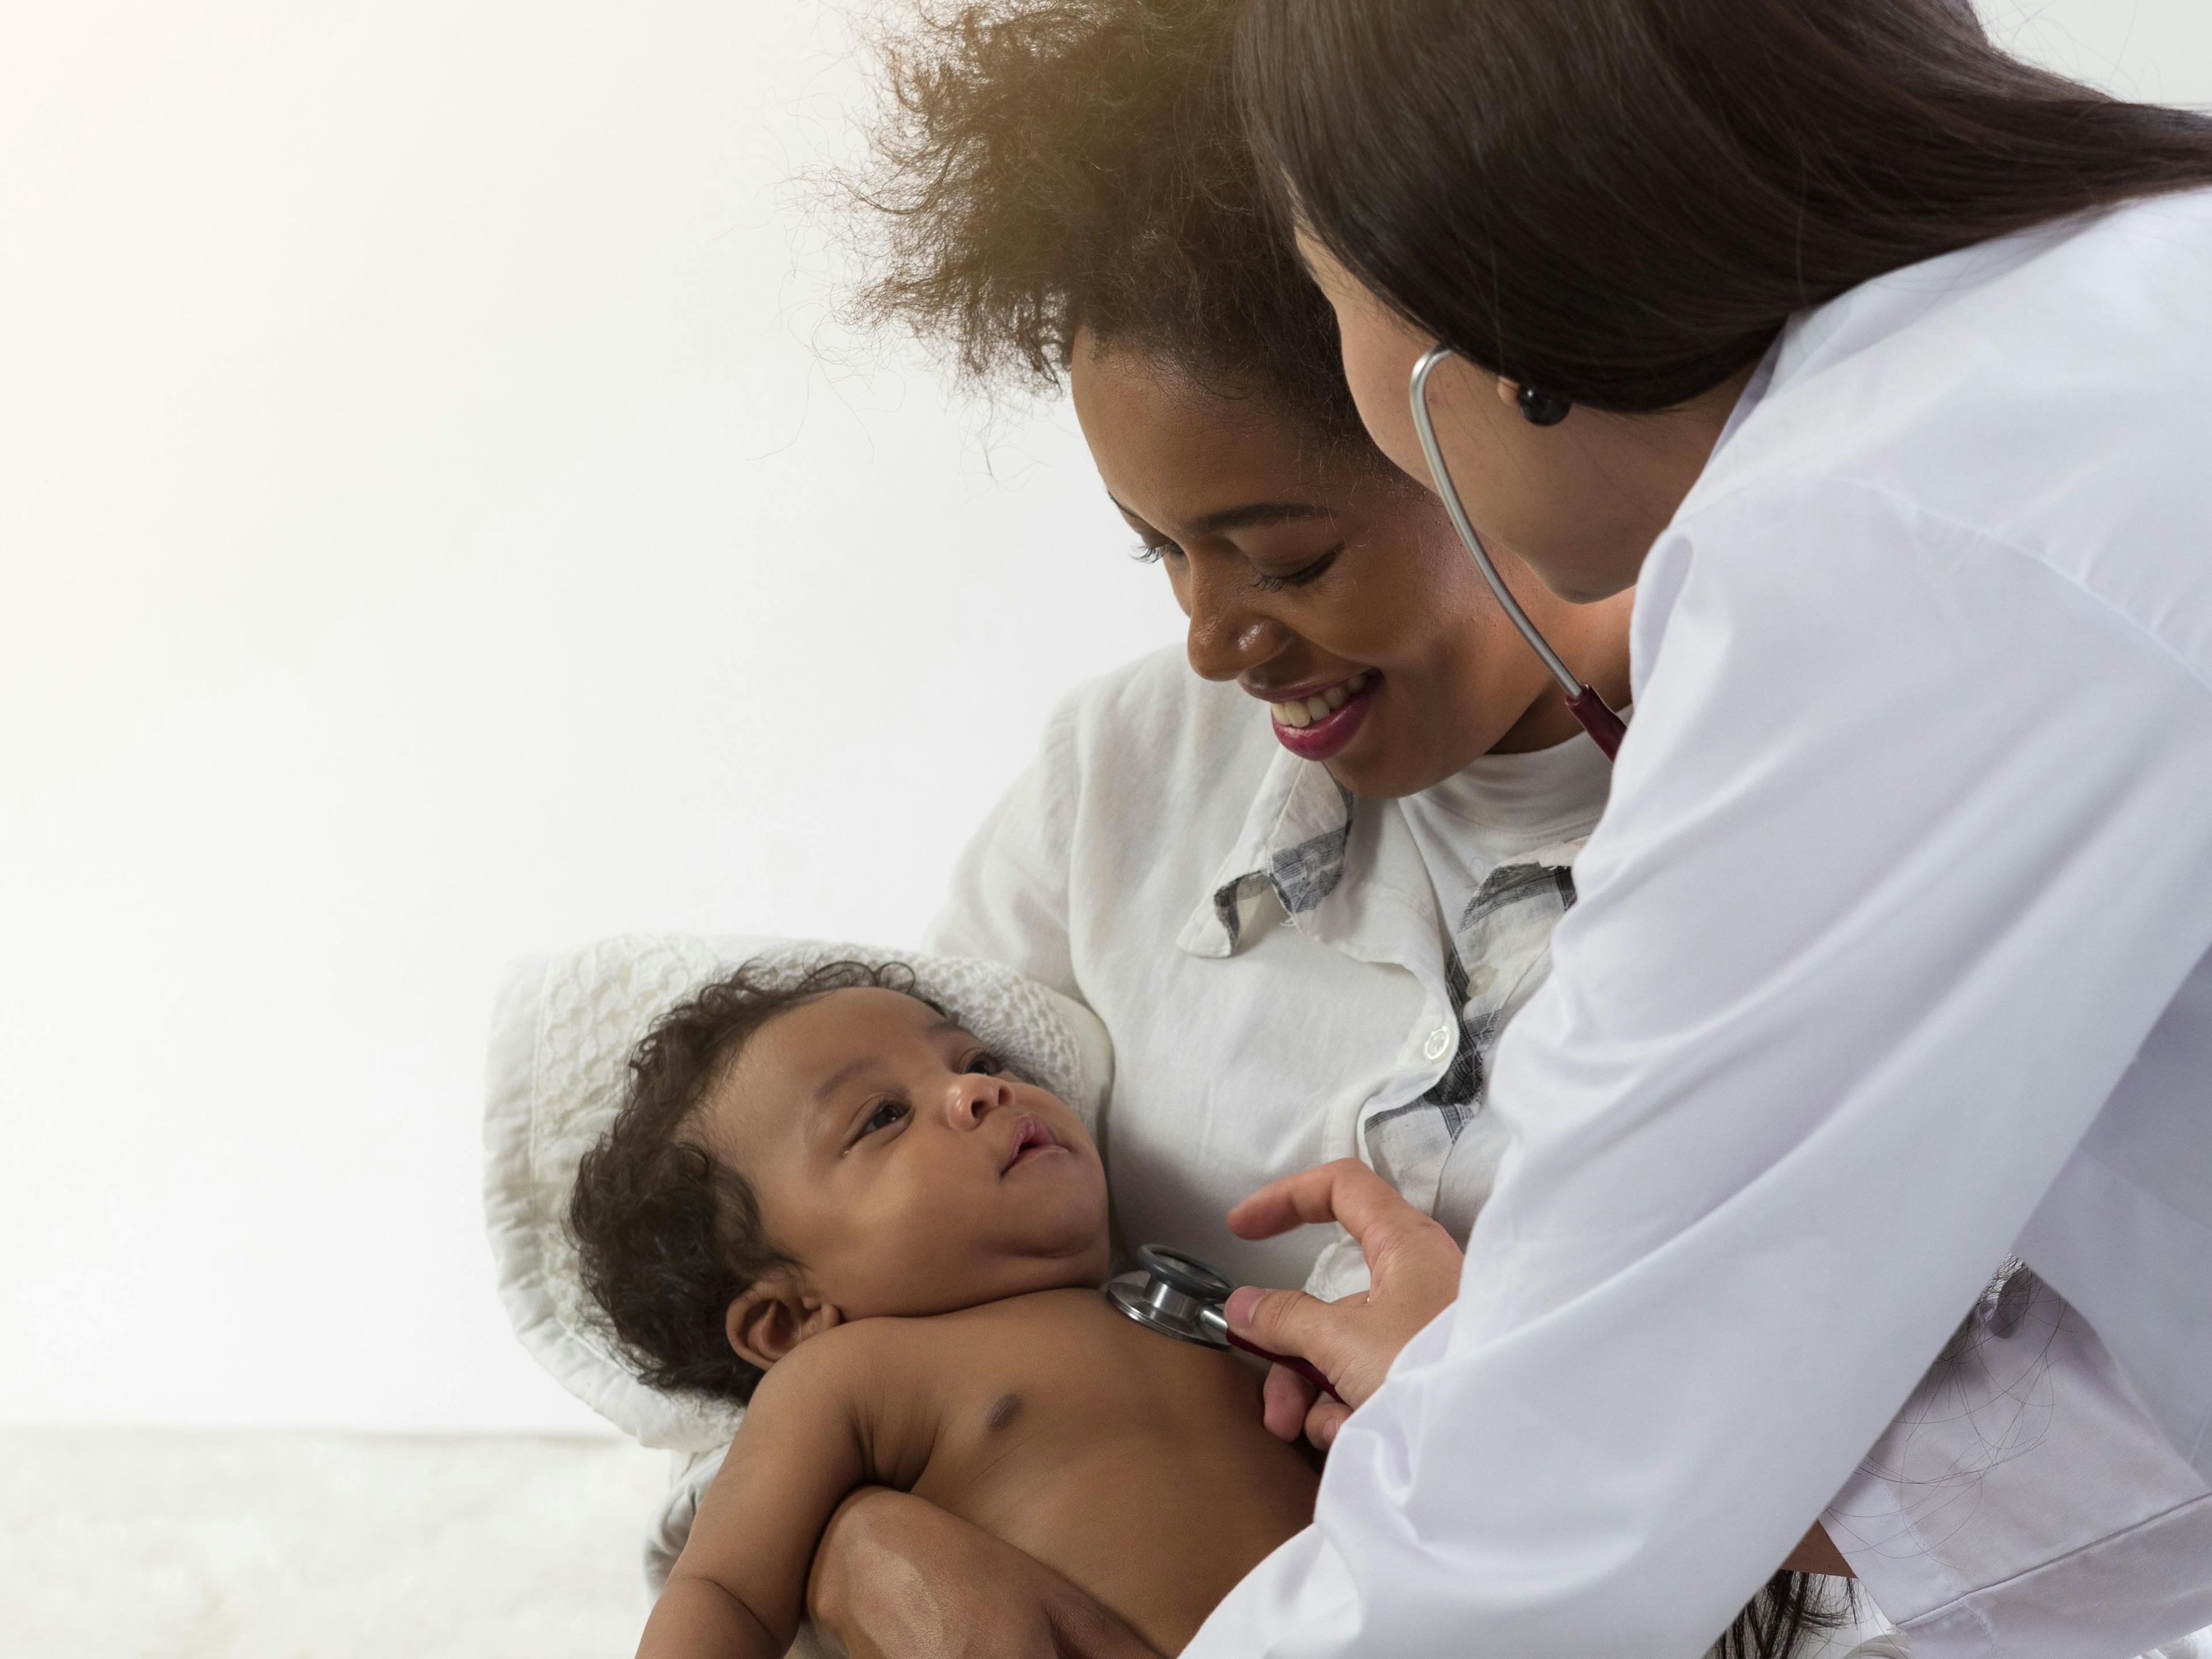 Asian doctor checking on African baby boy in mother's arms | Image credit: Dollydoll - stock.adobe.com